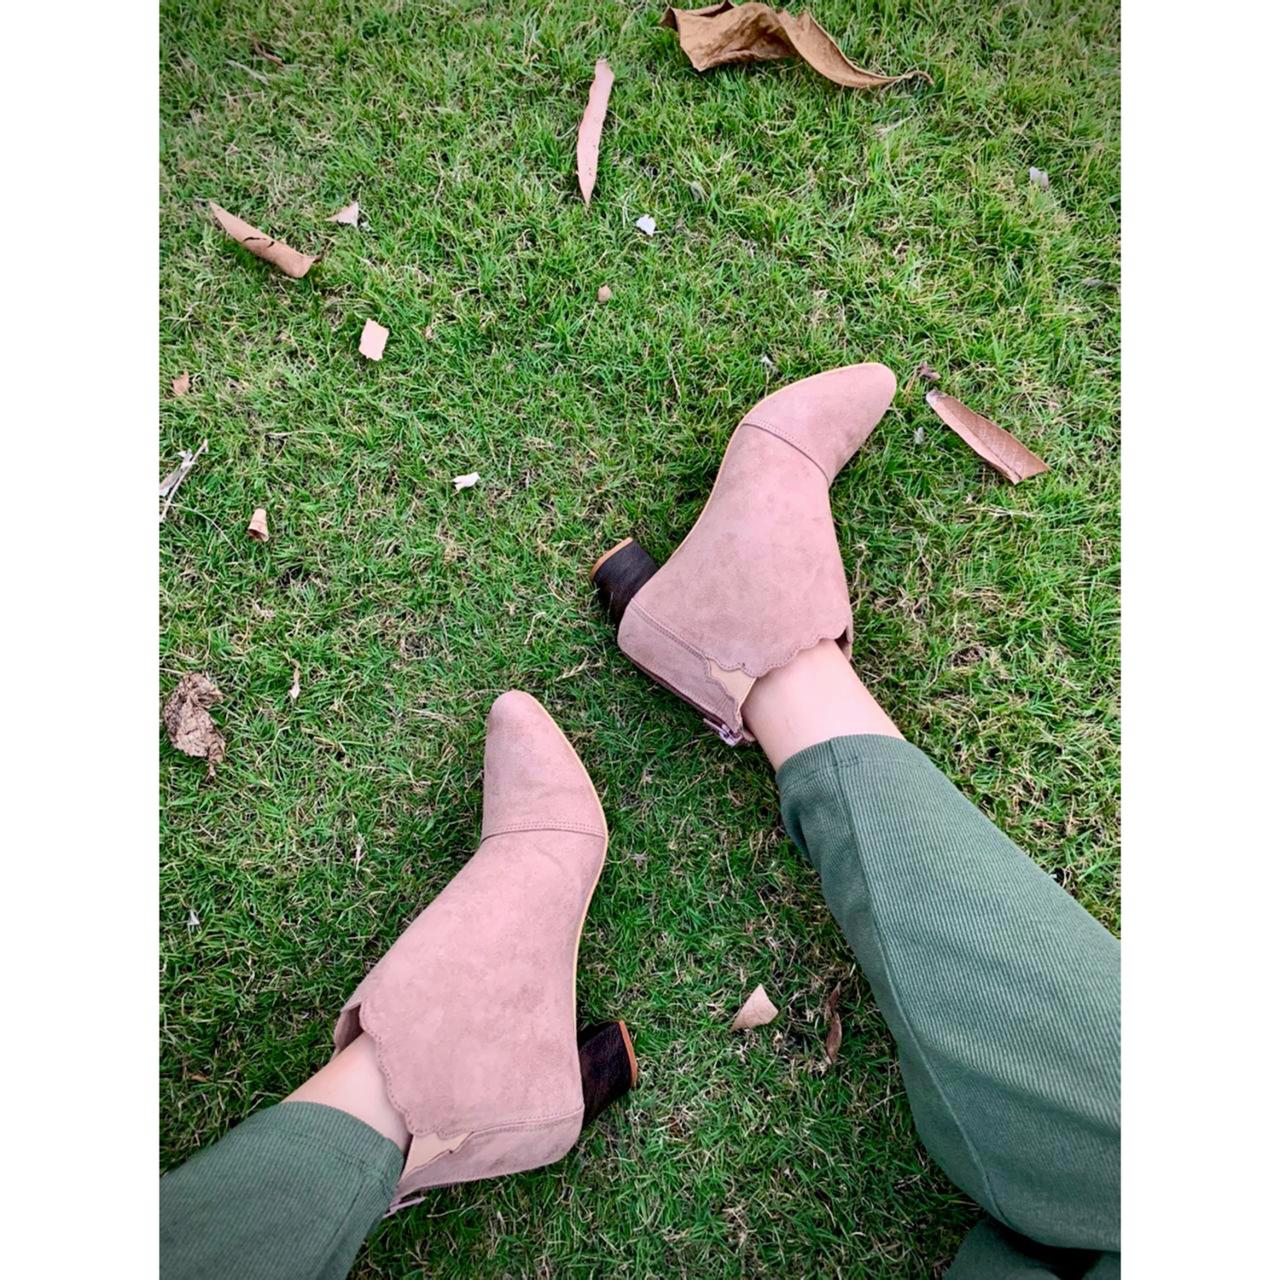 Blush Boots (Winter Shoes Blocks ankle Length Boots)